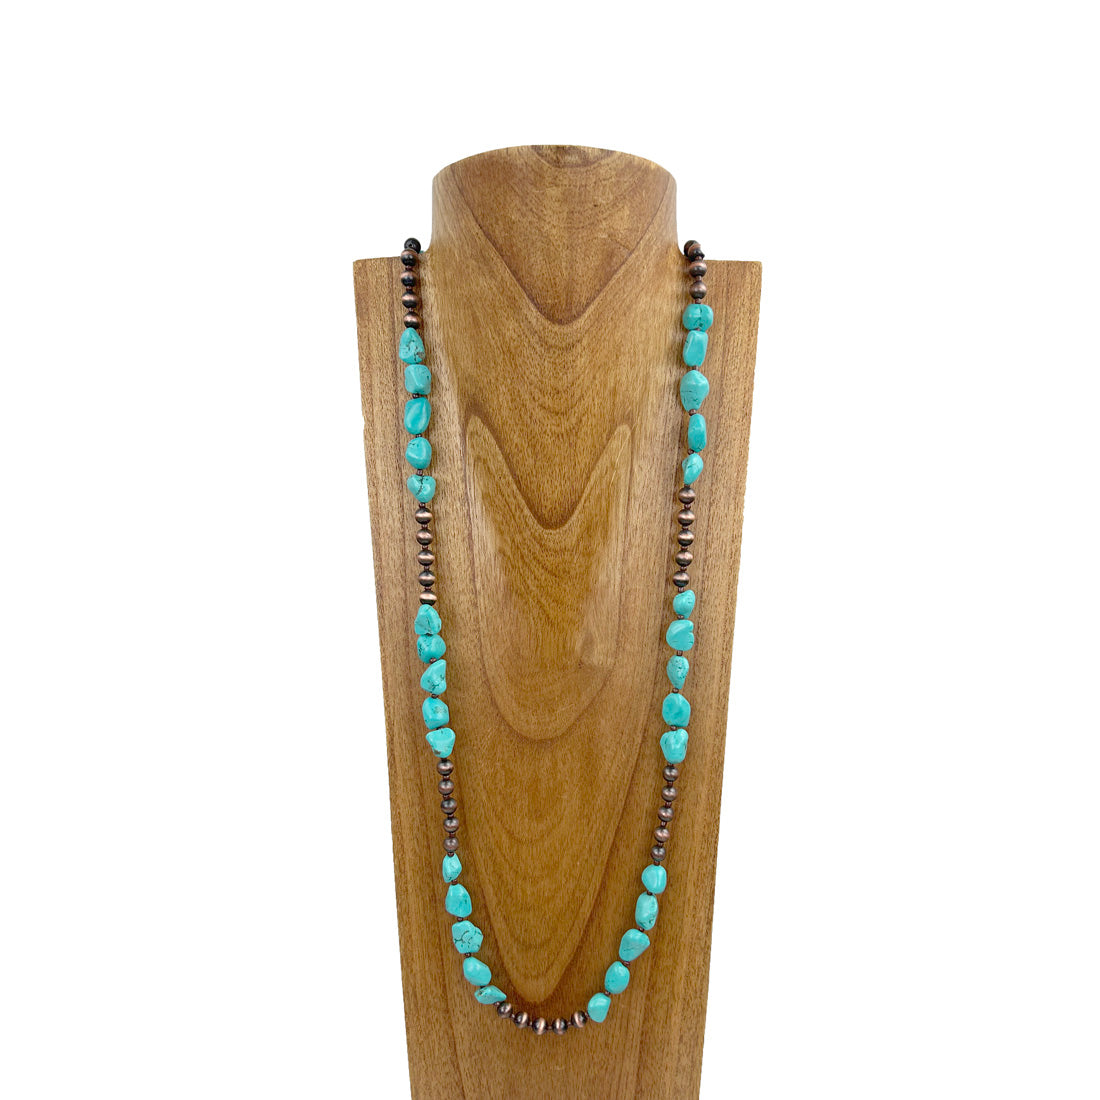 NKZ230930-09                40 inches green turquoise stone with copper Navajo pearl beads Necklace